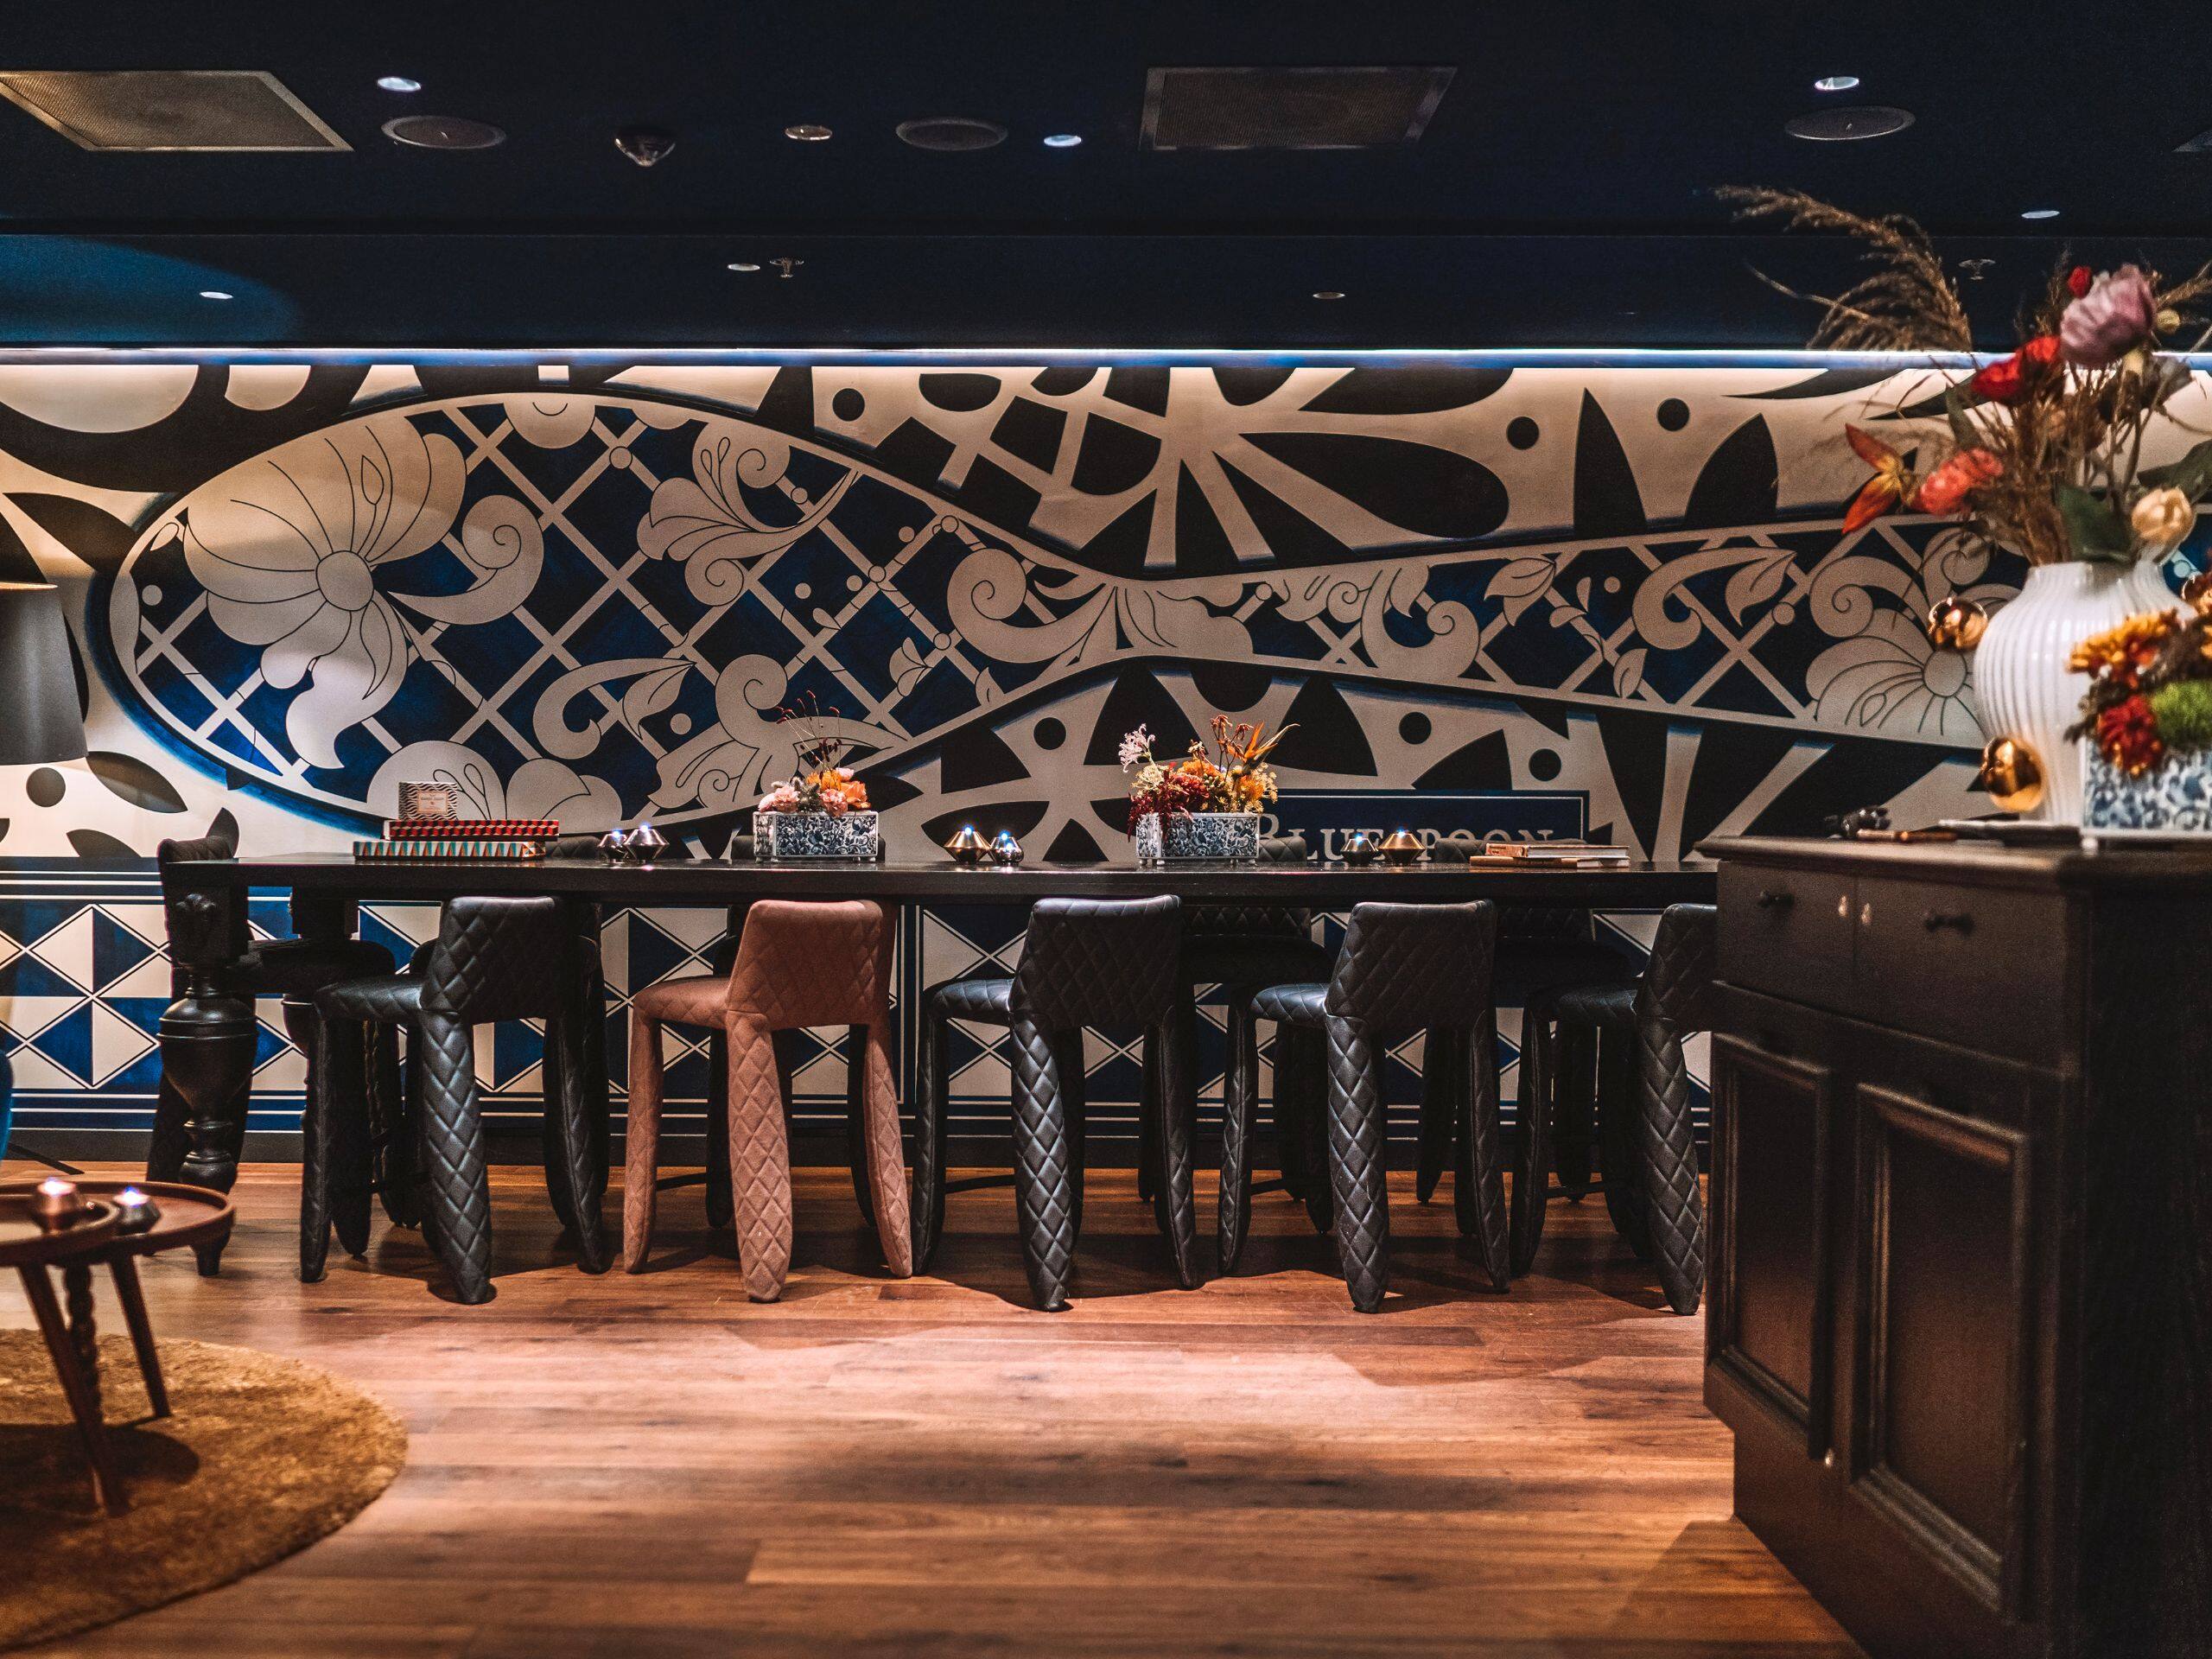 Andaz Amsterdam: a Heart That Transmits the Vibration of the City